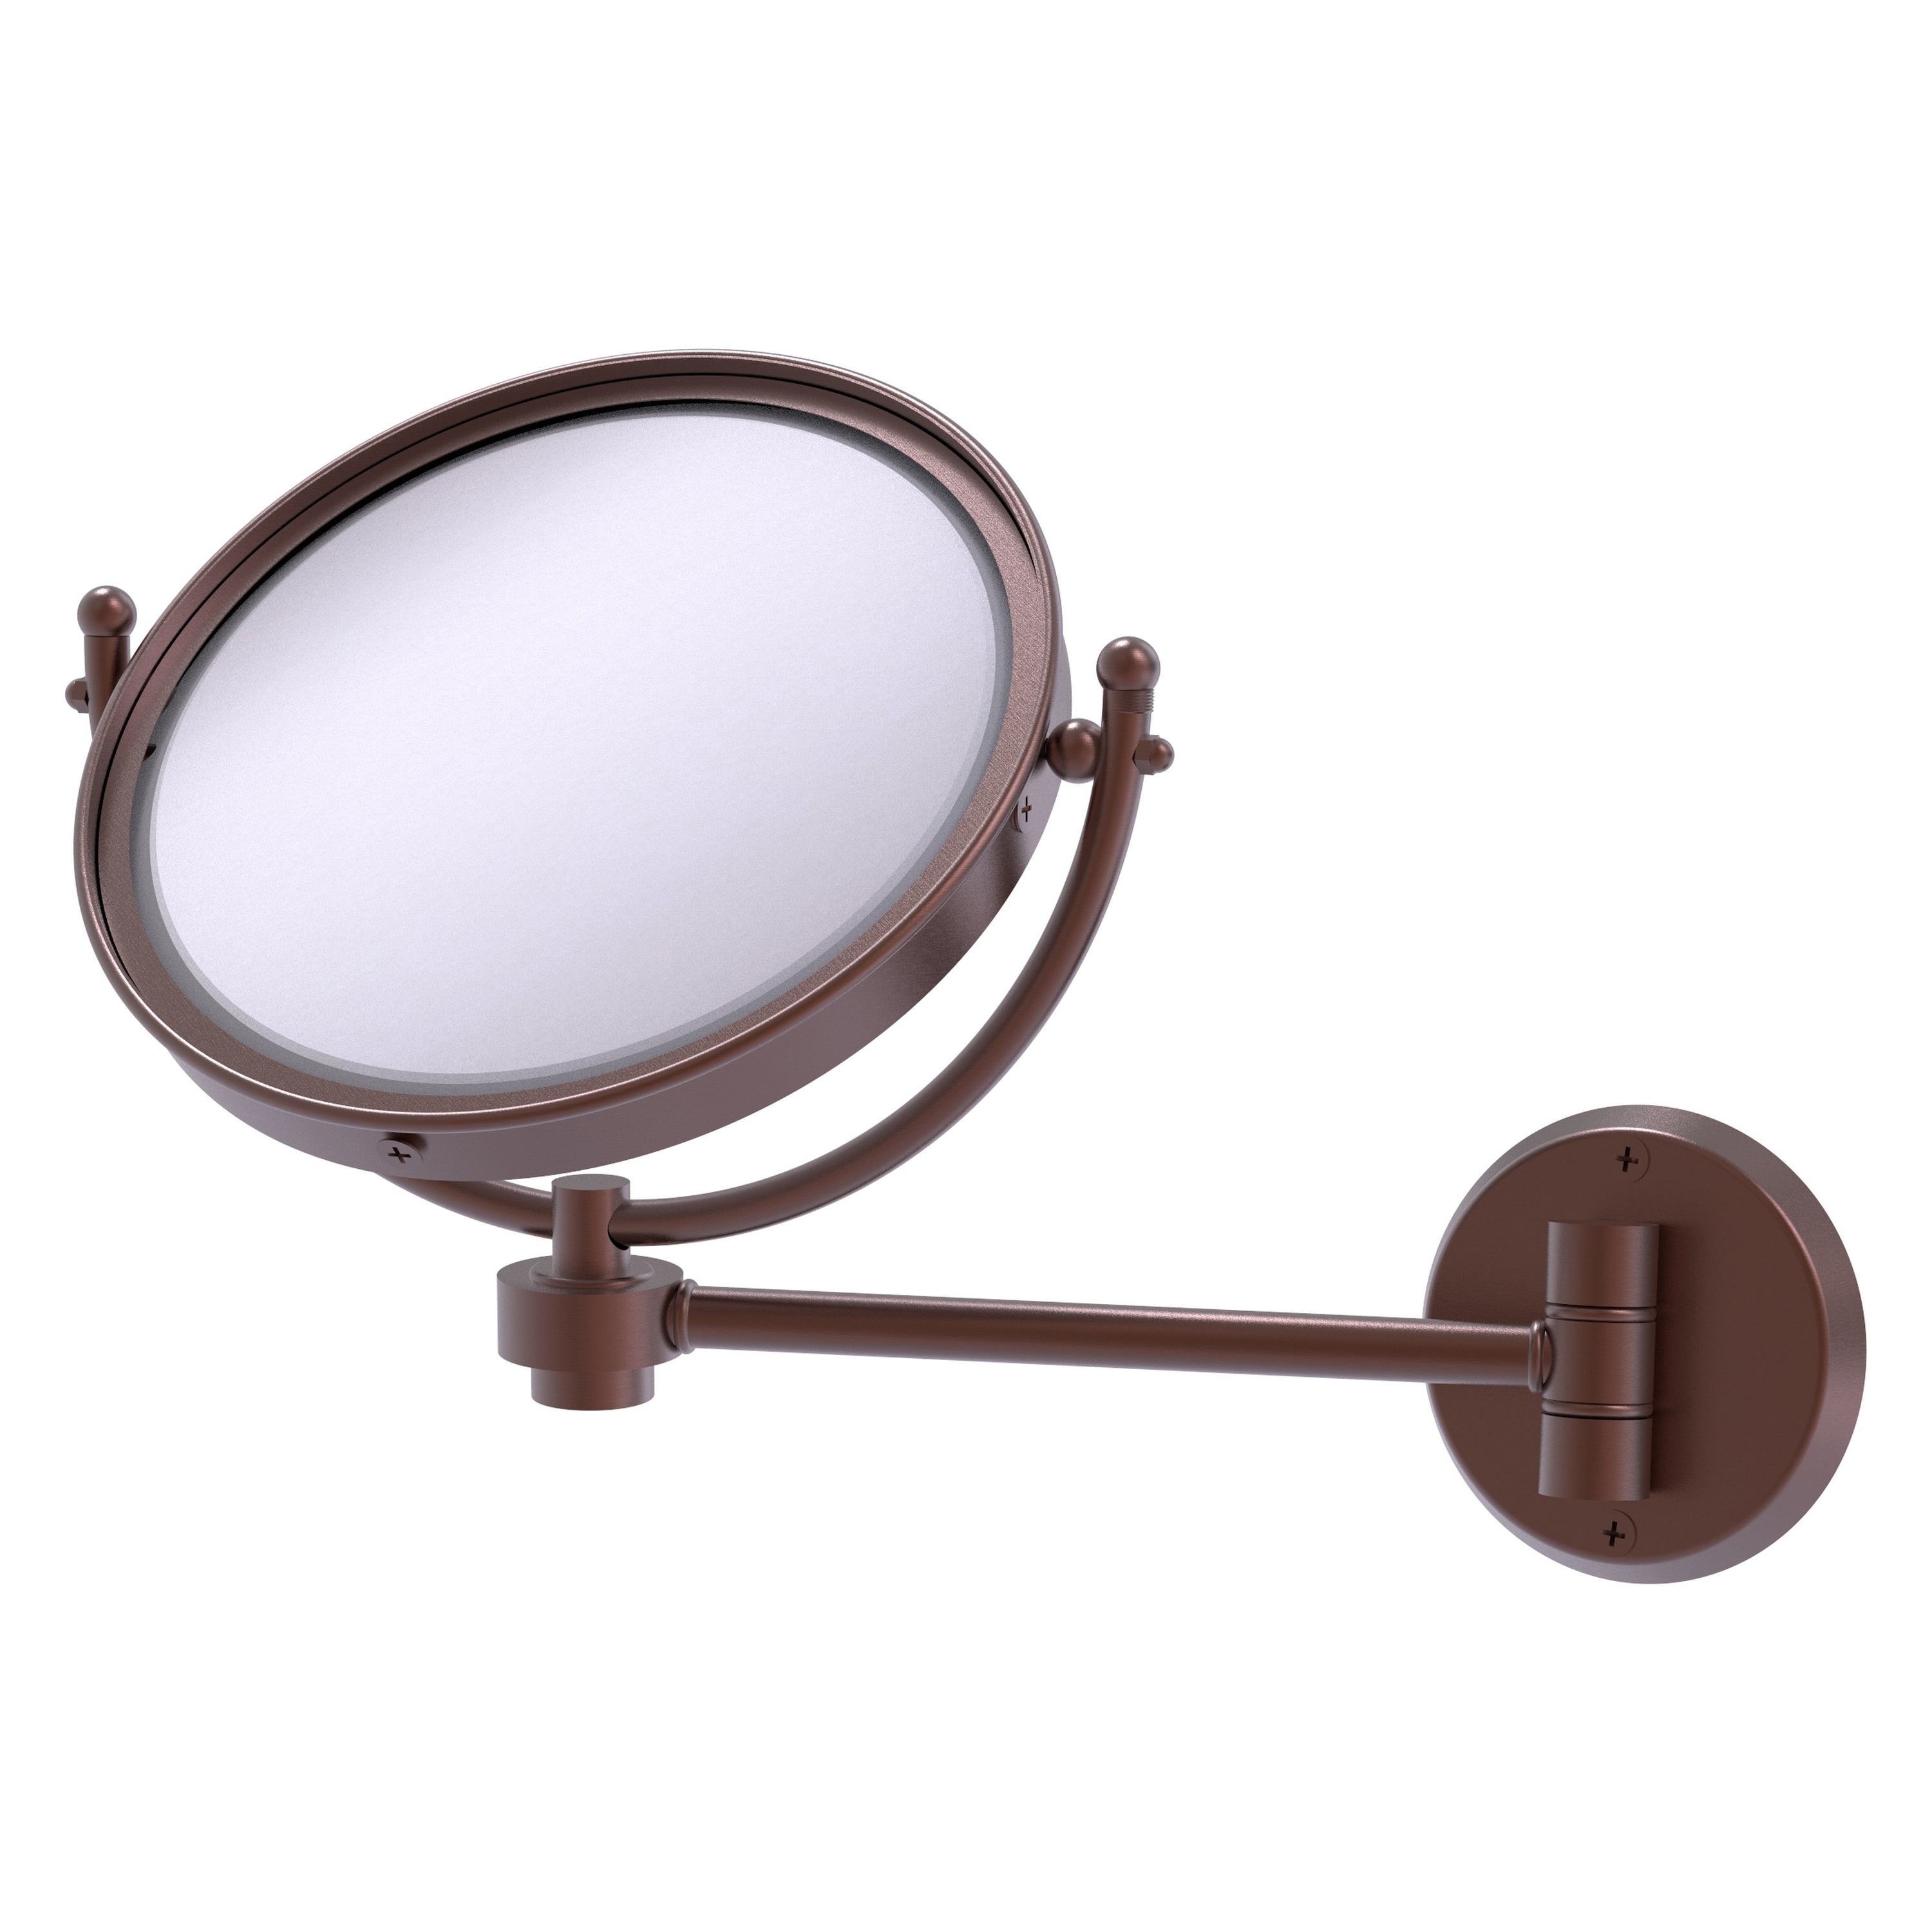 8-in x 10-in Antique Copper Double-sided 2X Magnifying Wall-mounted Vanity Mirror | - Allied Brass WM-5/2X-CA